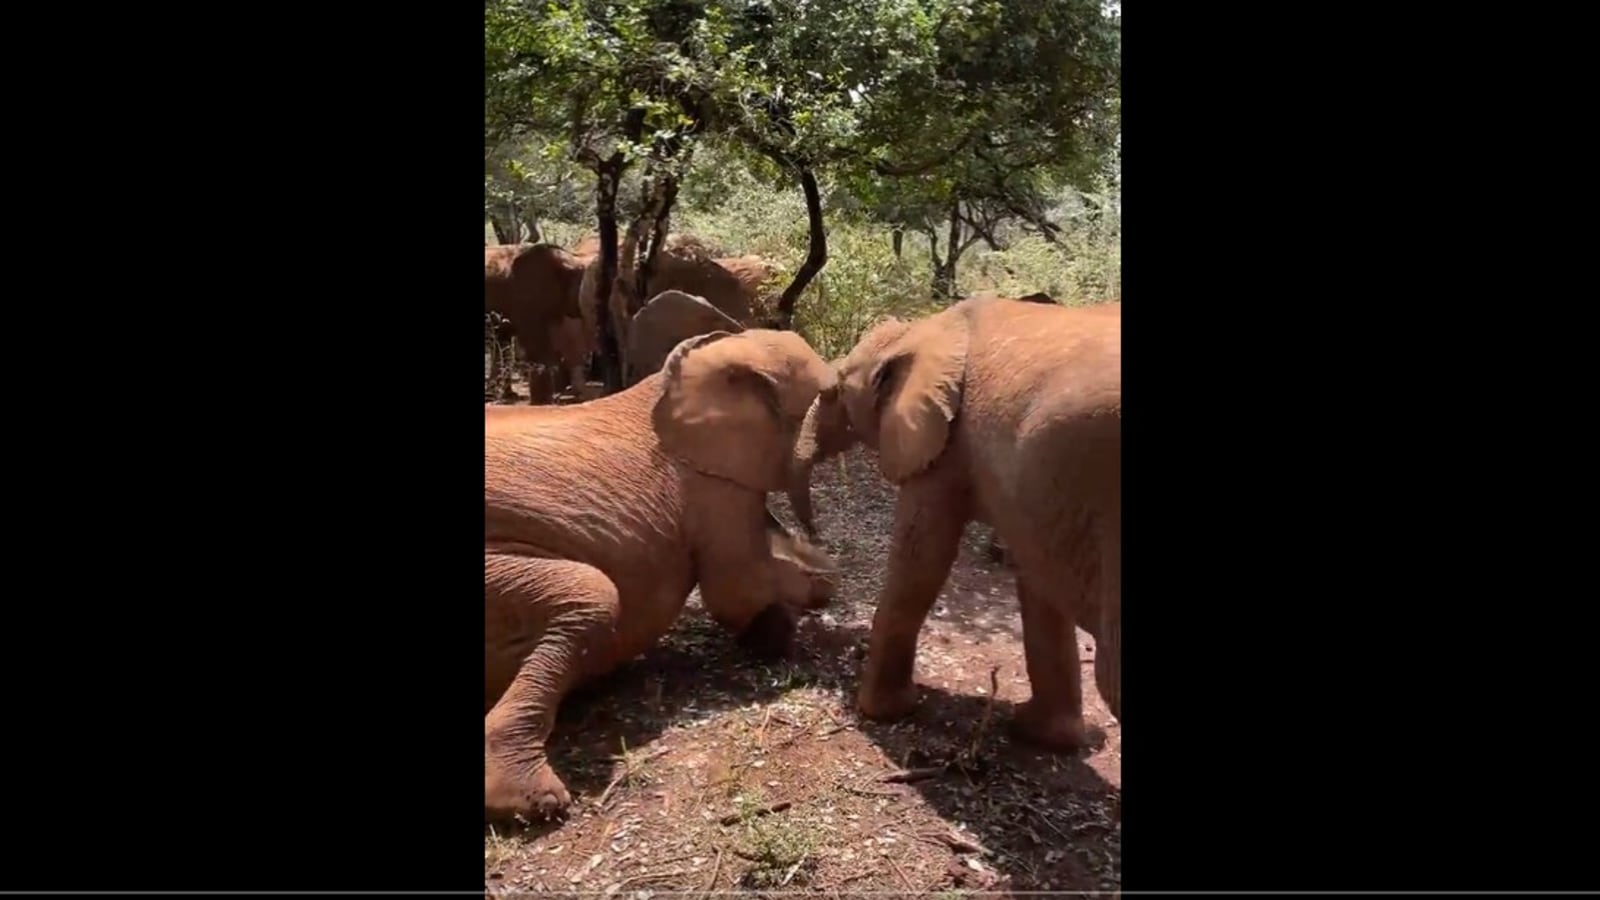 Elephant brothers enjoying playtime will make your day. Watch cute animal  video | Trending - Hindustan Times